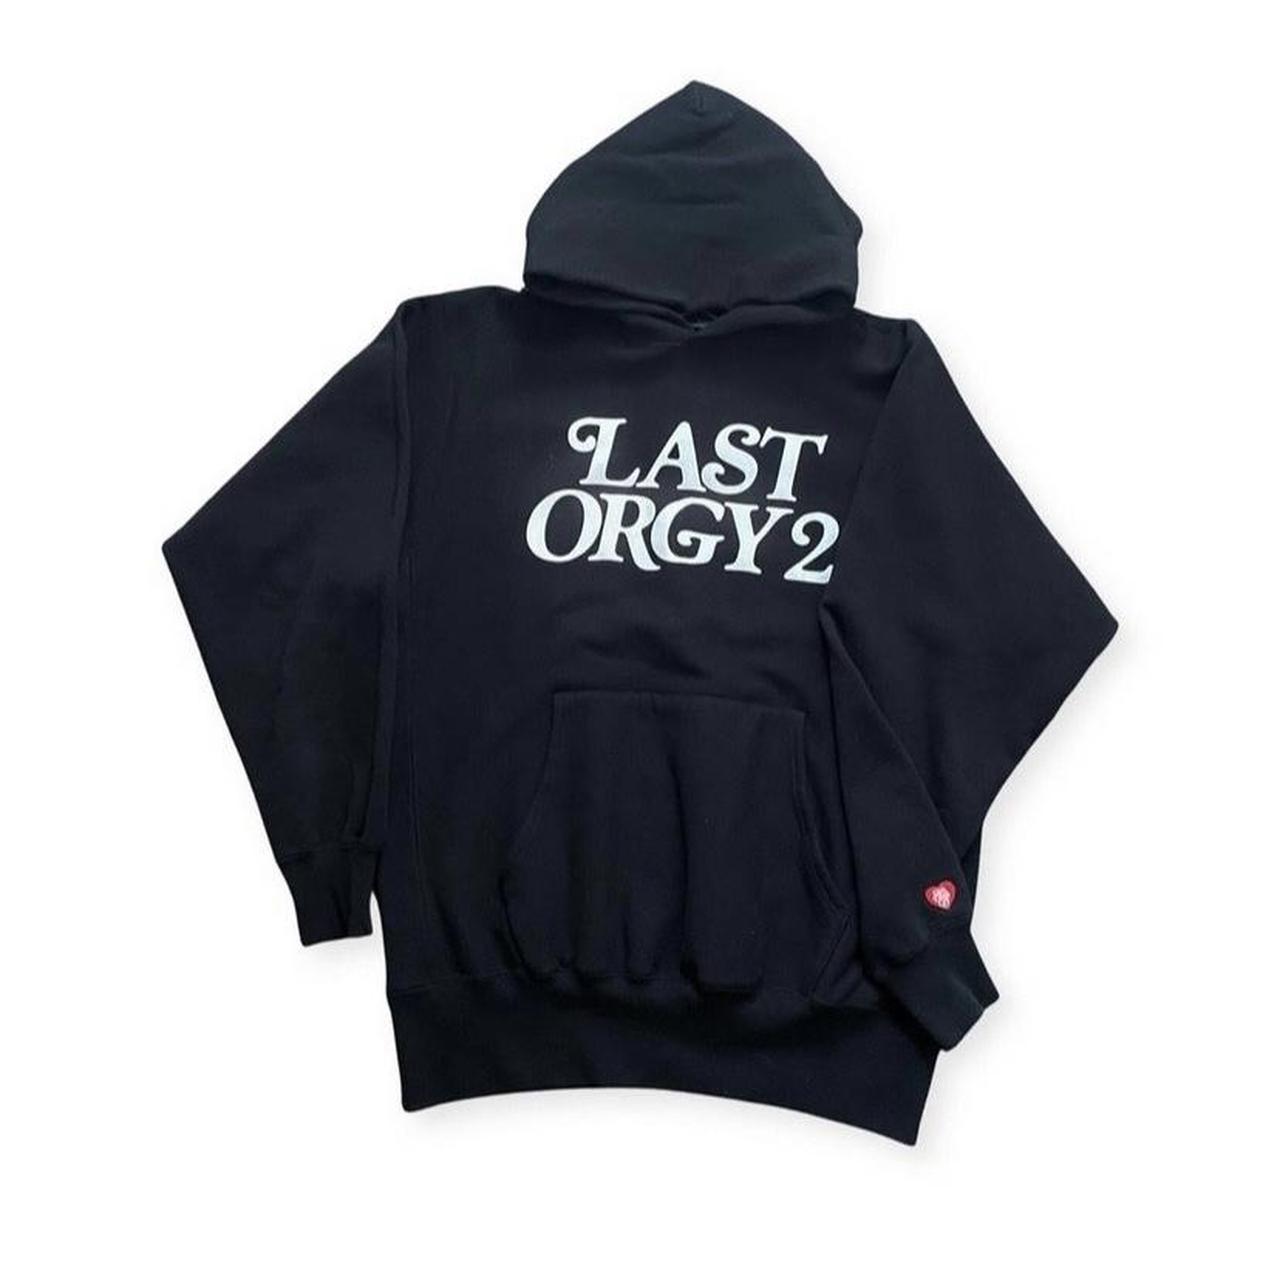 Undercover Last Orgy 2 hoodie, brand new size XL...